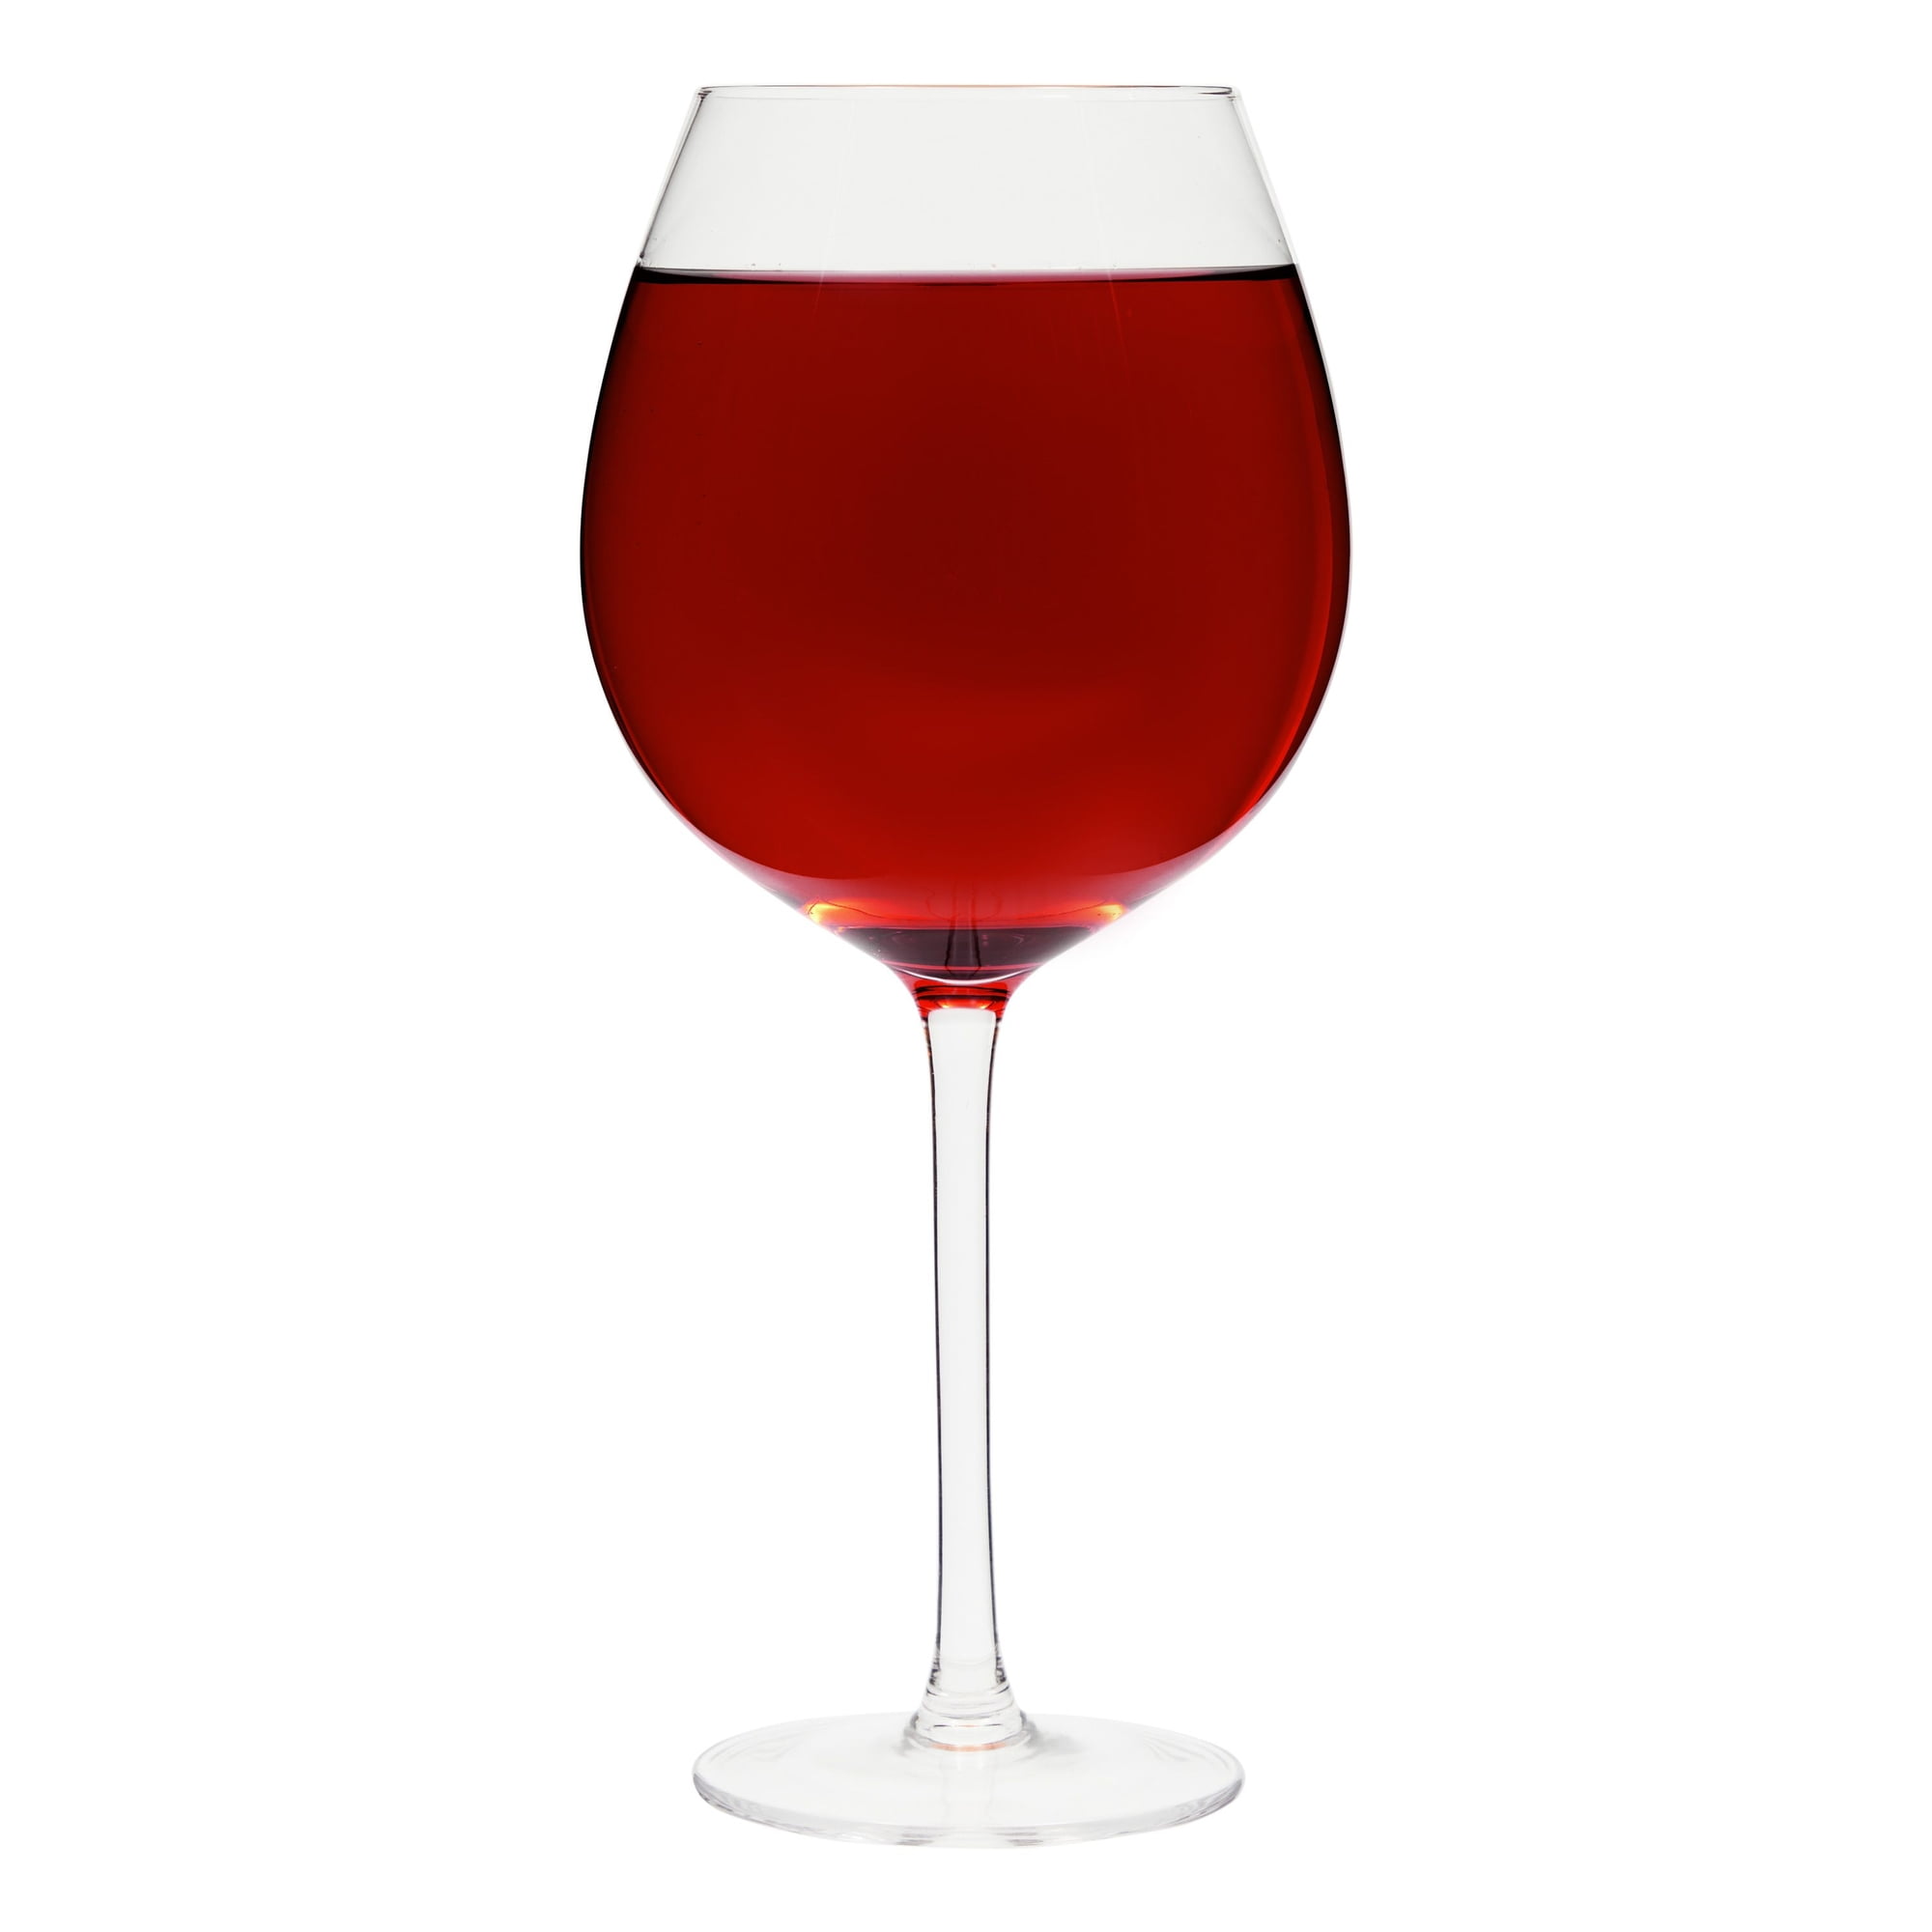 Heavy Duty Big Size wine glass at Ksh 2500/= Per set of 6 📞+254704525828  to make your order We do countrywide delivery free within…